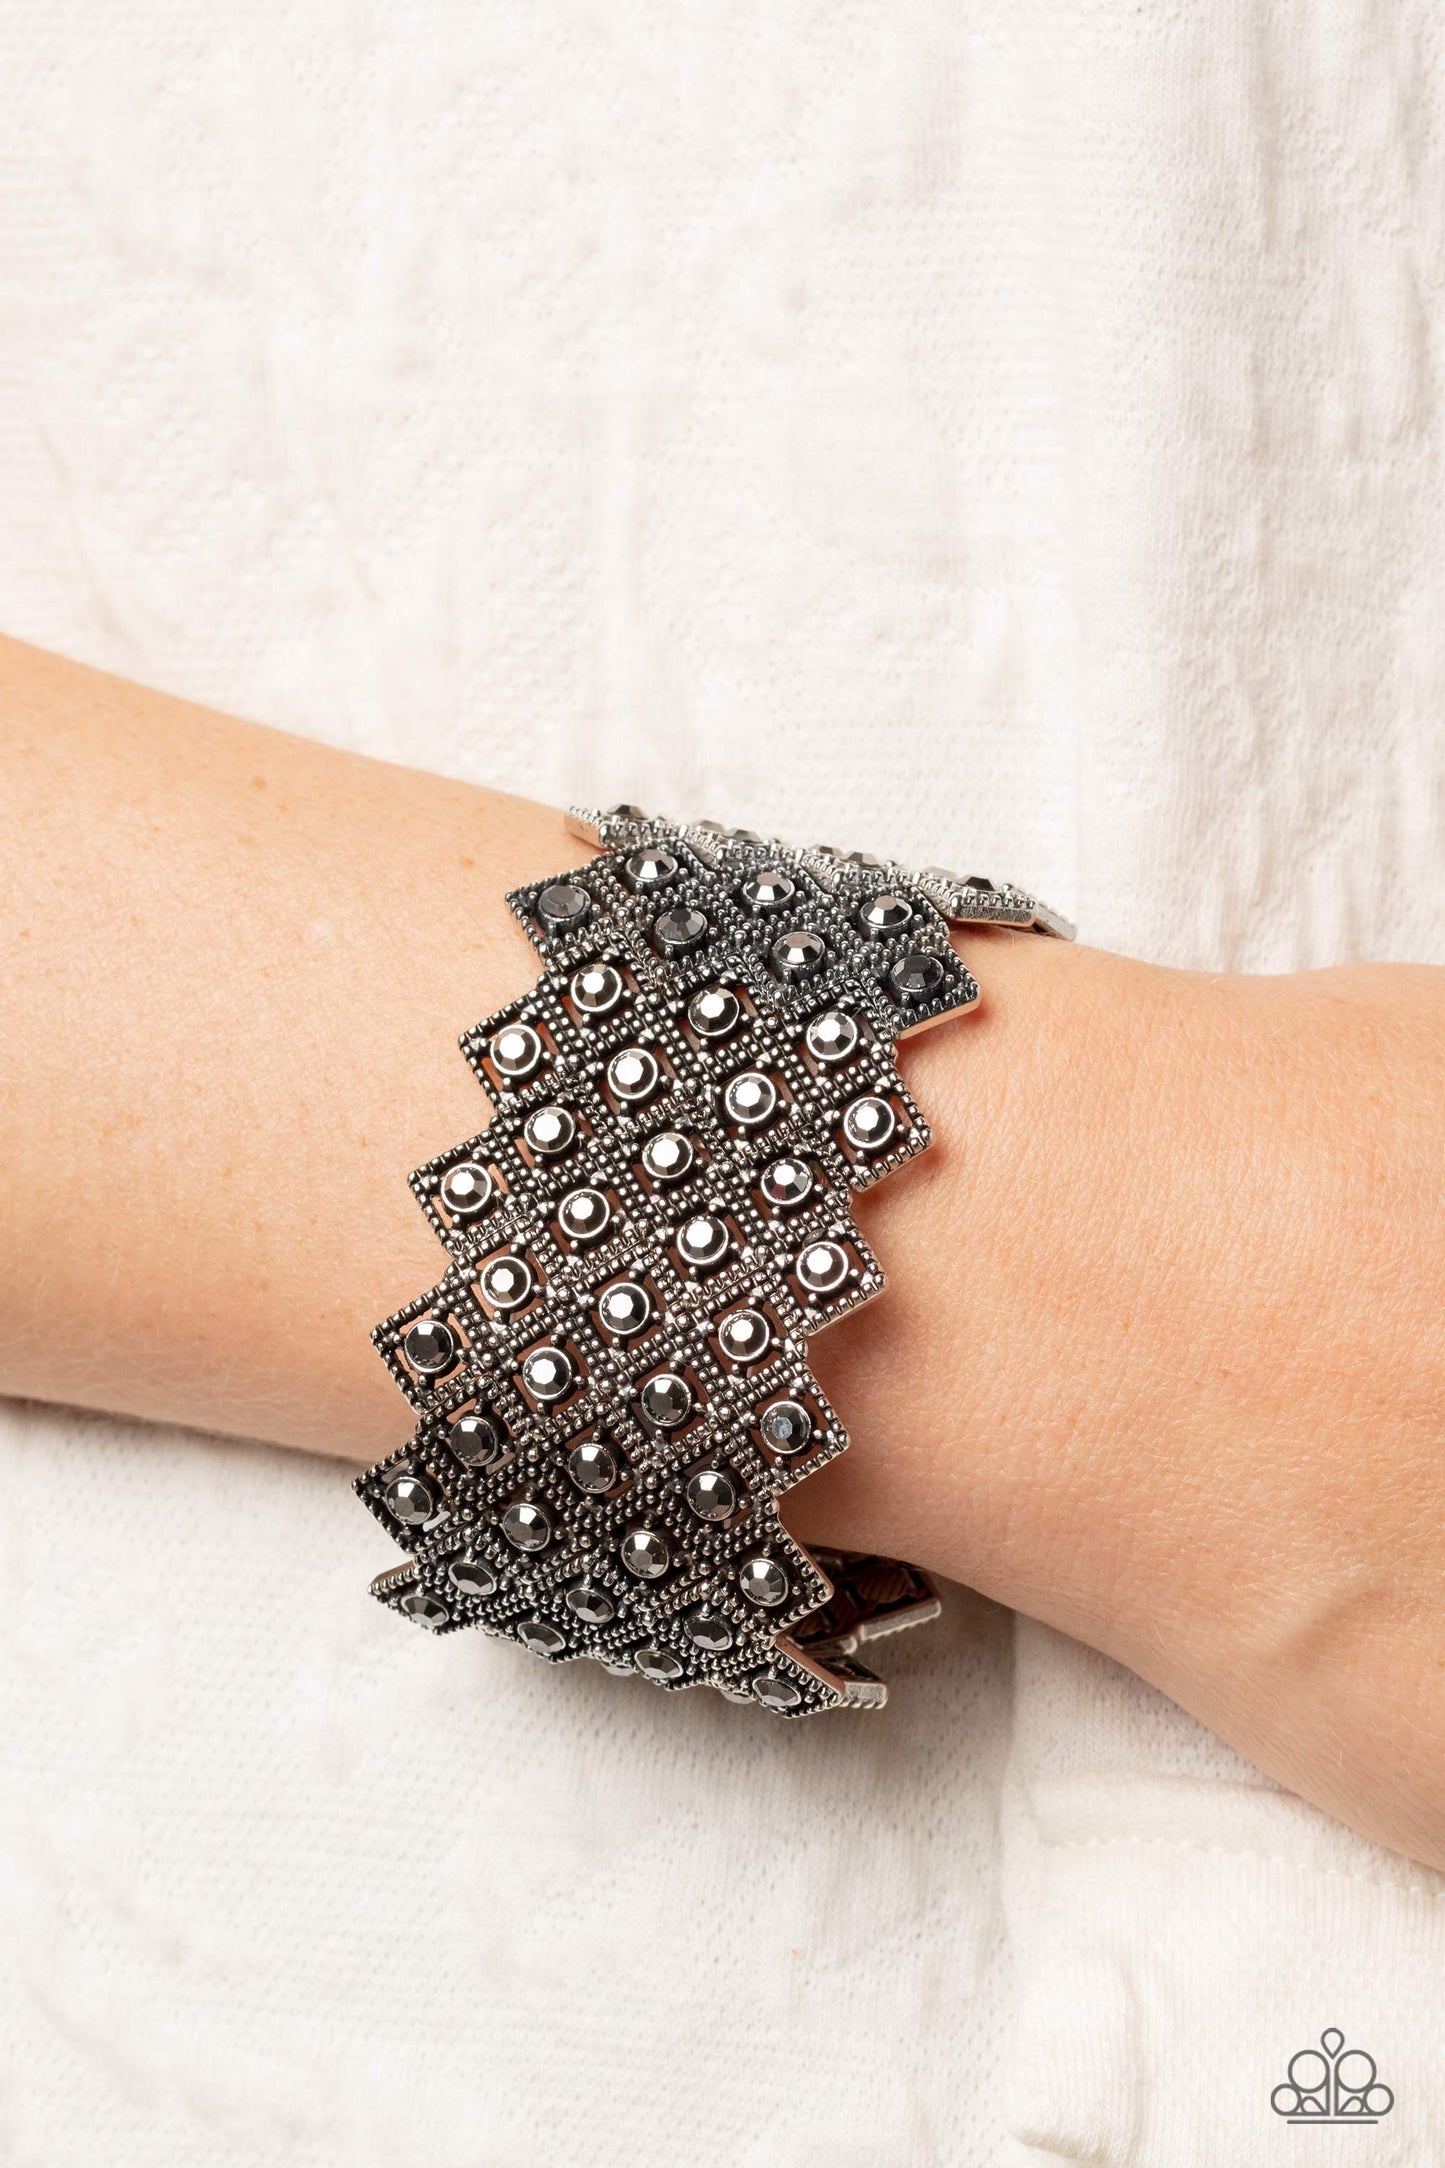 Paparazzi DECO in the Rough - Silver Bracelet -Paparazzi Jewelry Images 